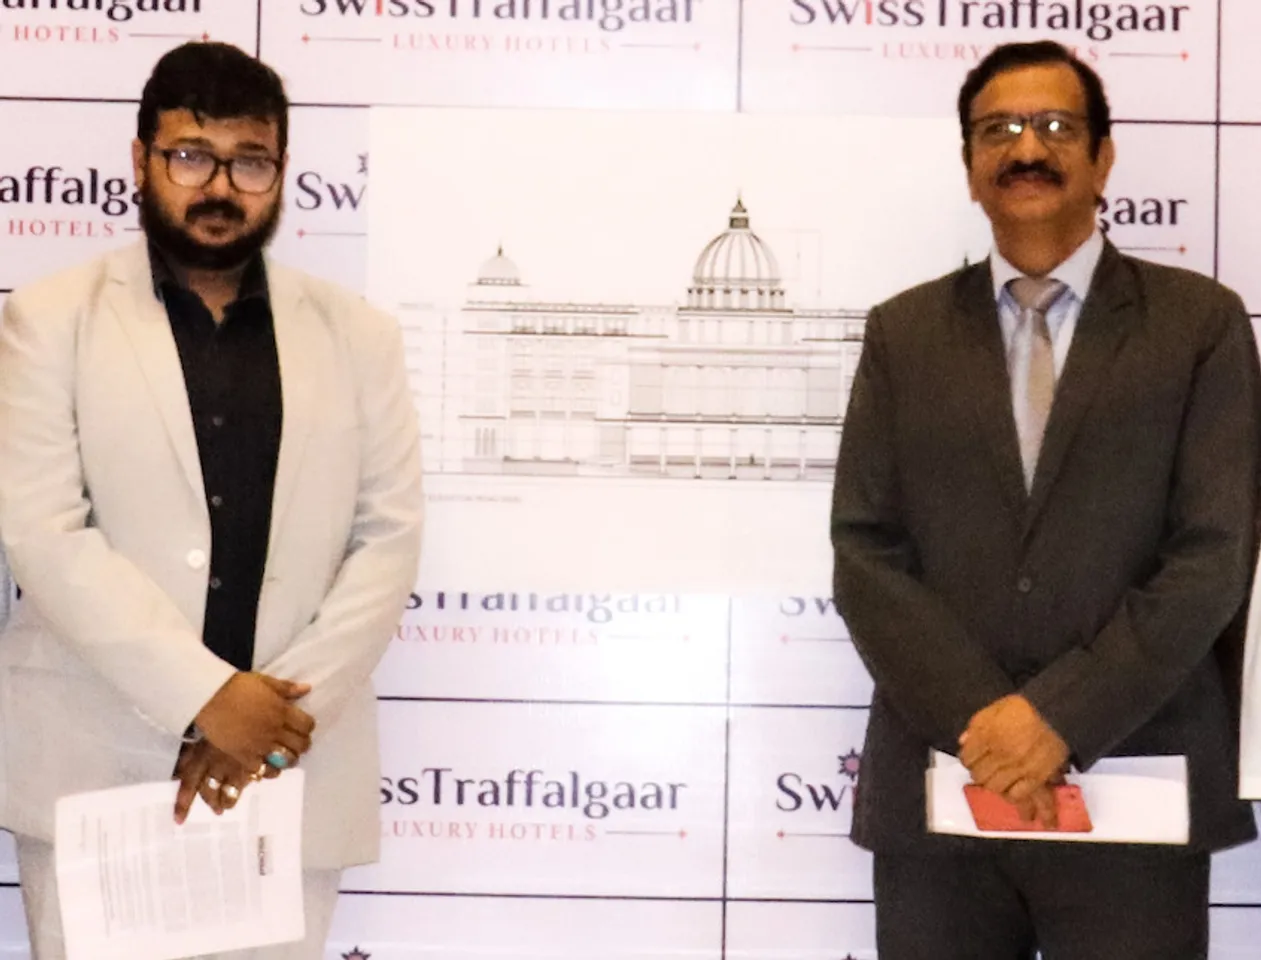 UK-Based Swiss Traffalgaar Enters India and Selects Nashik for its First Hotel